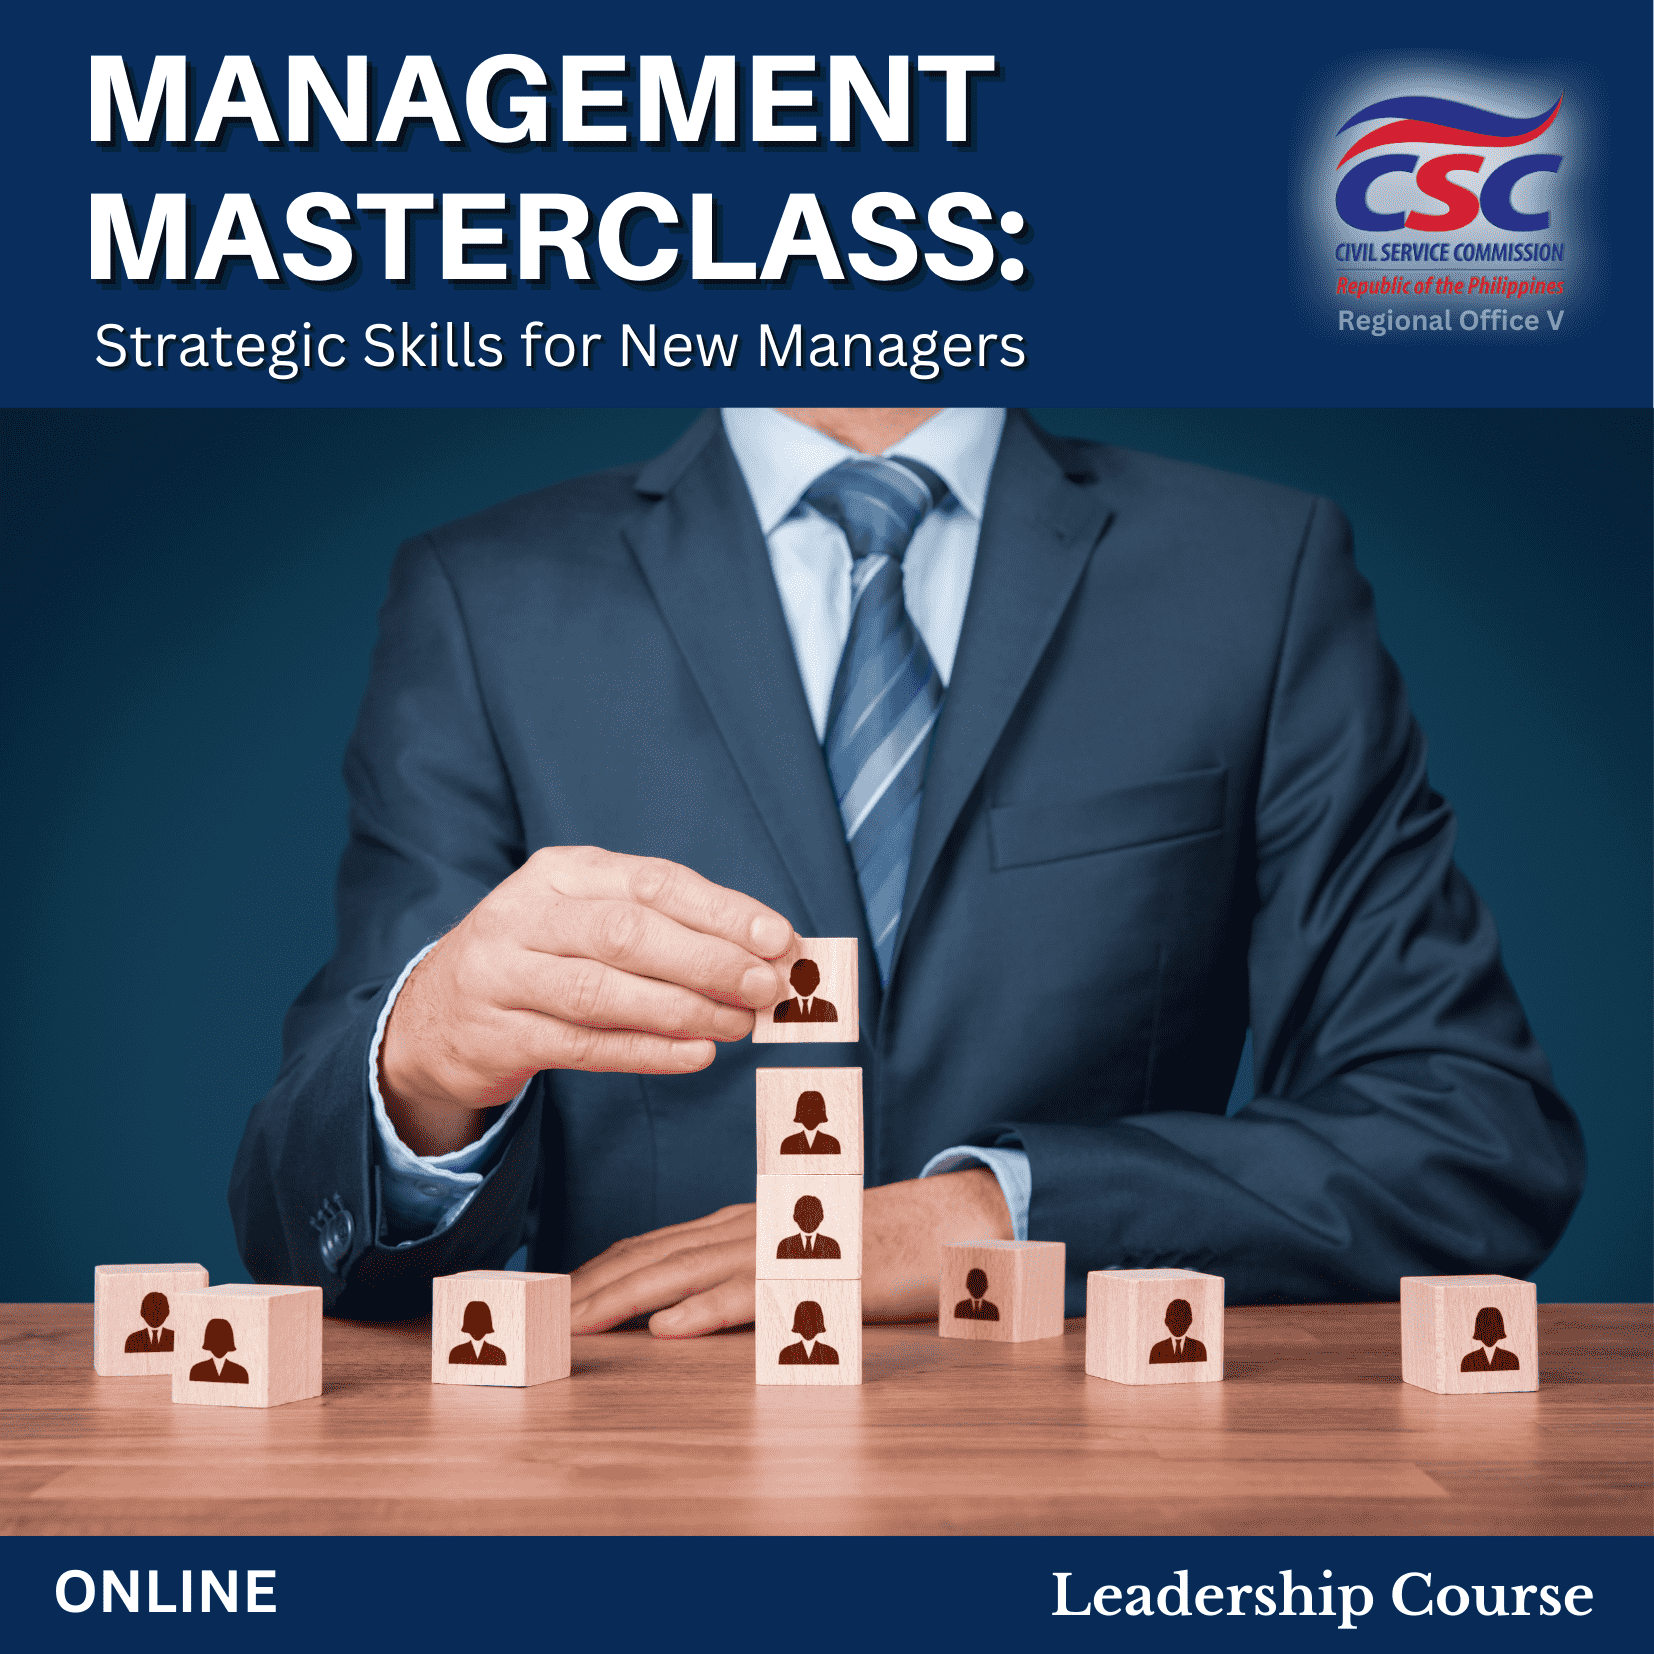 Management Masterclass: Strategic Skills for New Managers